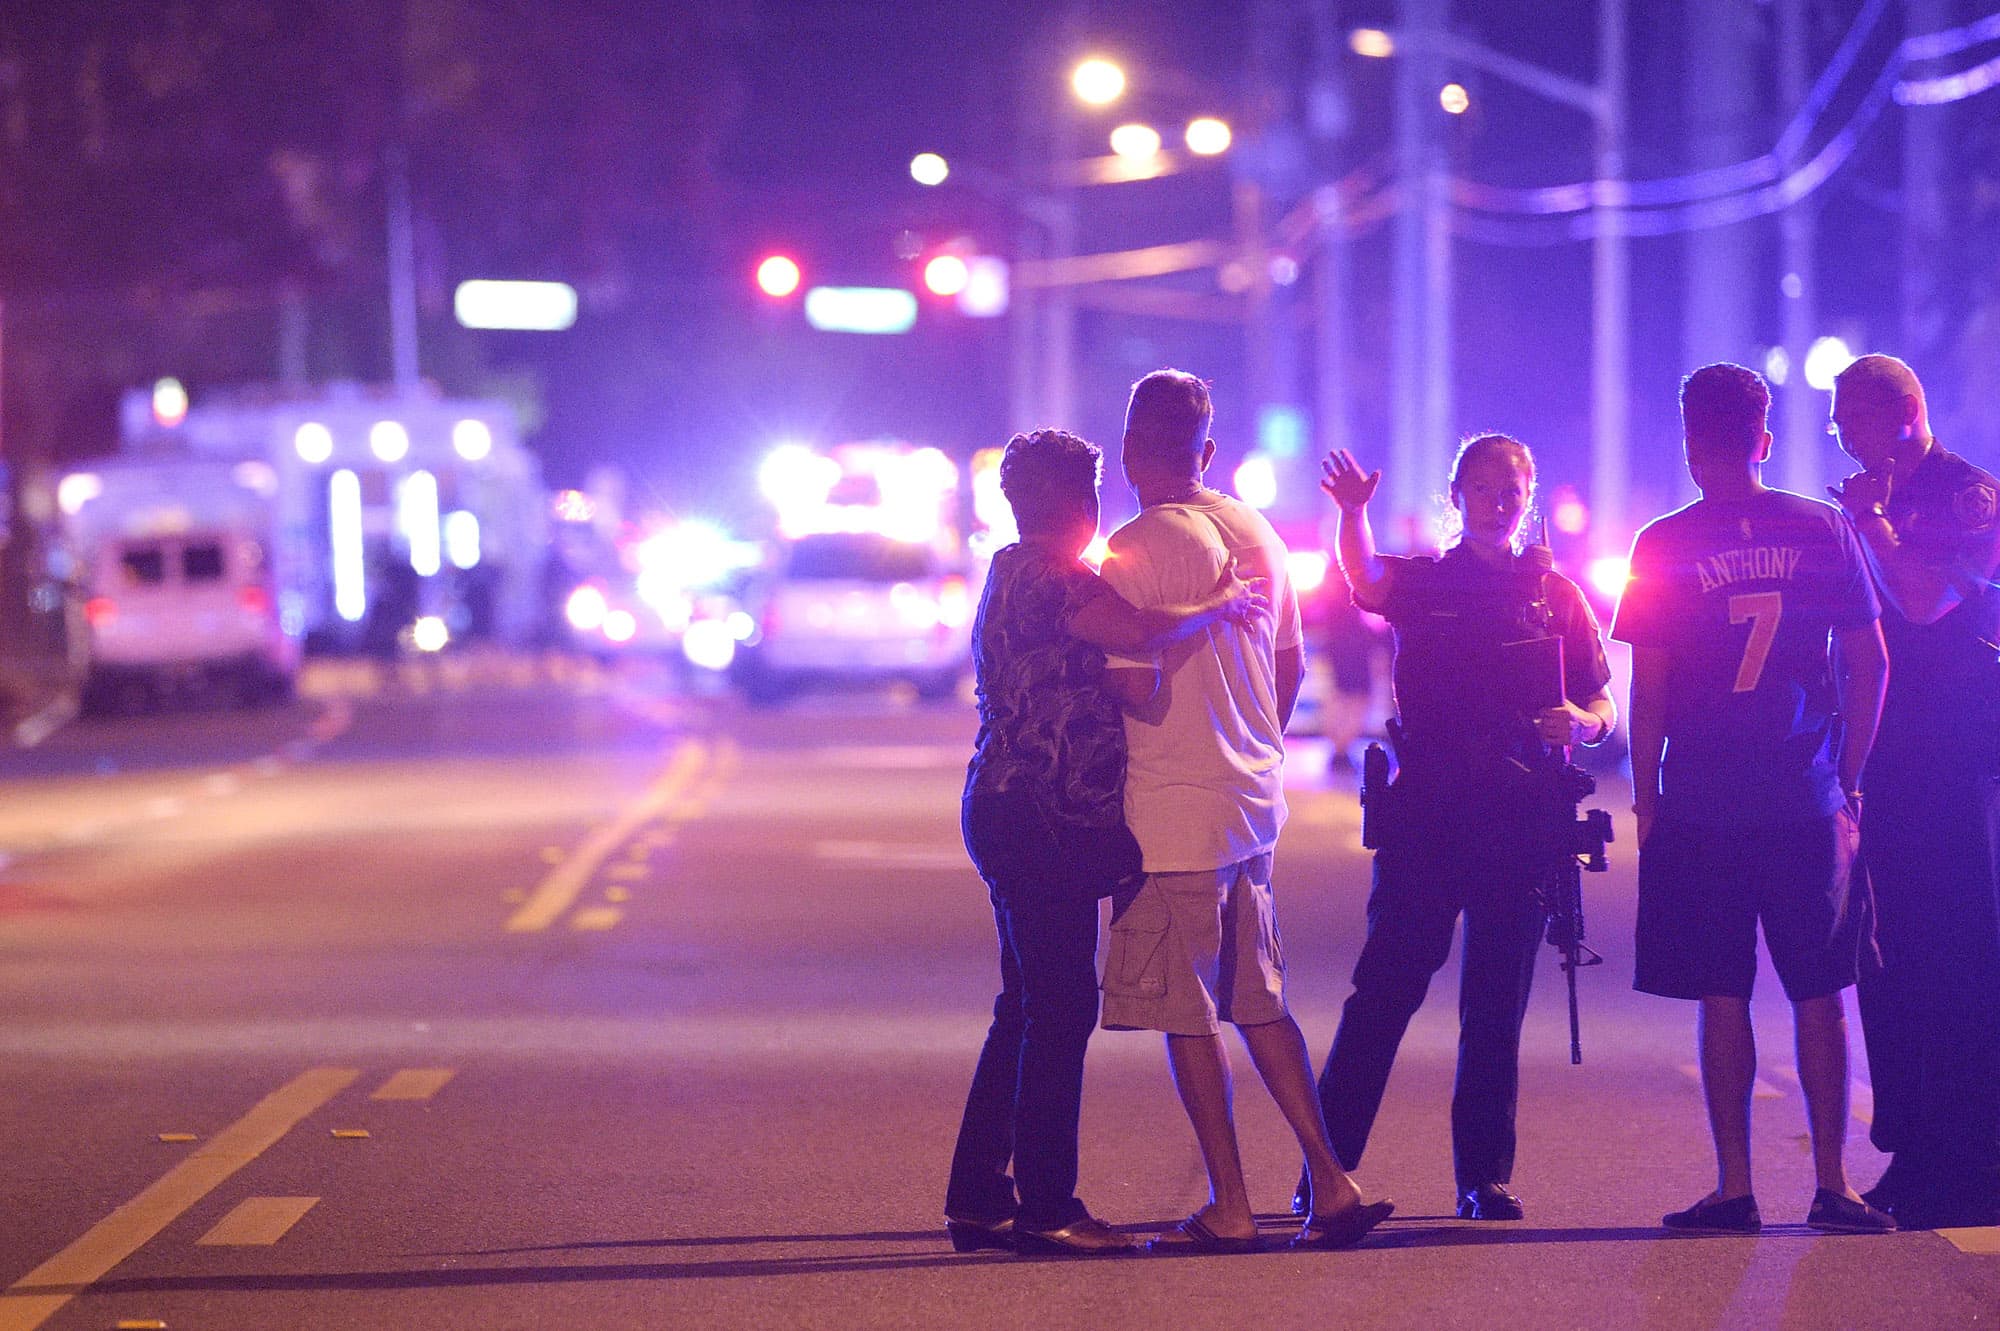 Orlando Police officers direct family members away from a fatal shooting at Pulse Orlando nightclub early Sunday. (Phelan M. Ebenhack/AP)